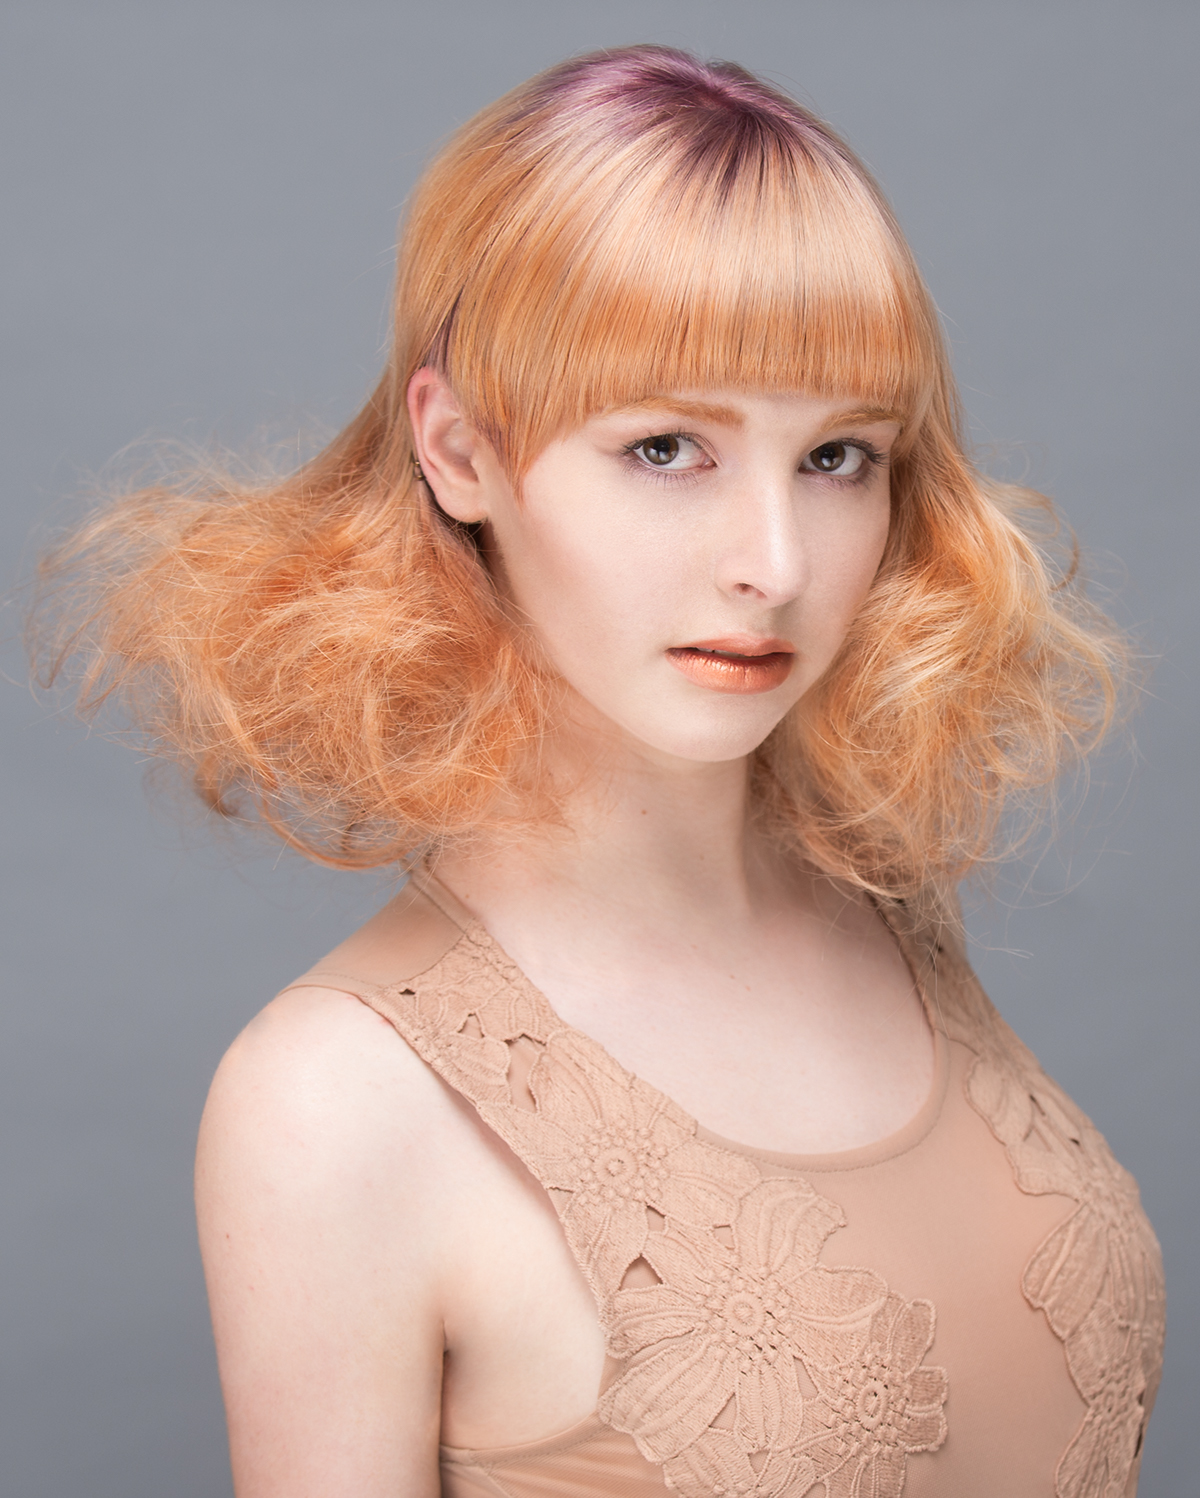 Wella 2016 Hairstyle Competition-Headroom , Paradise on Behance